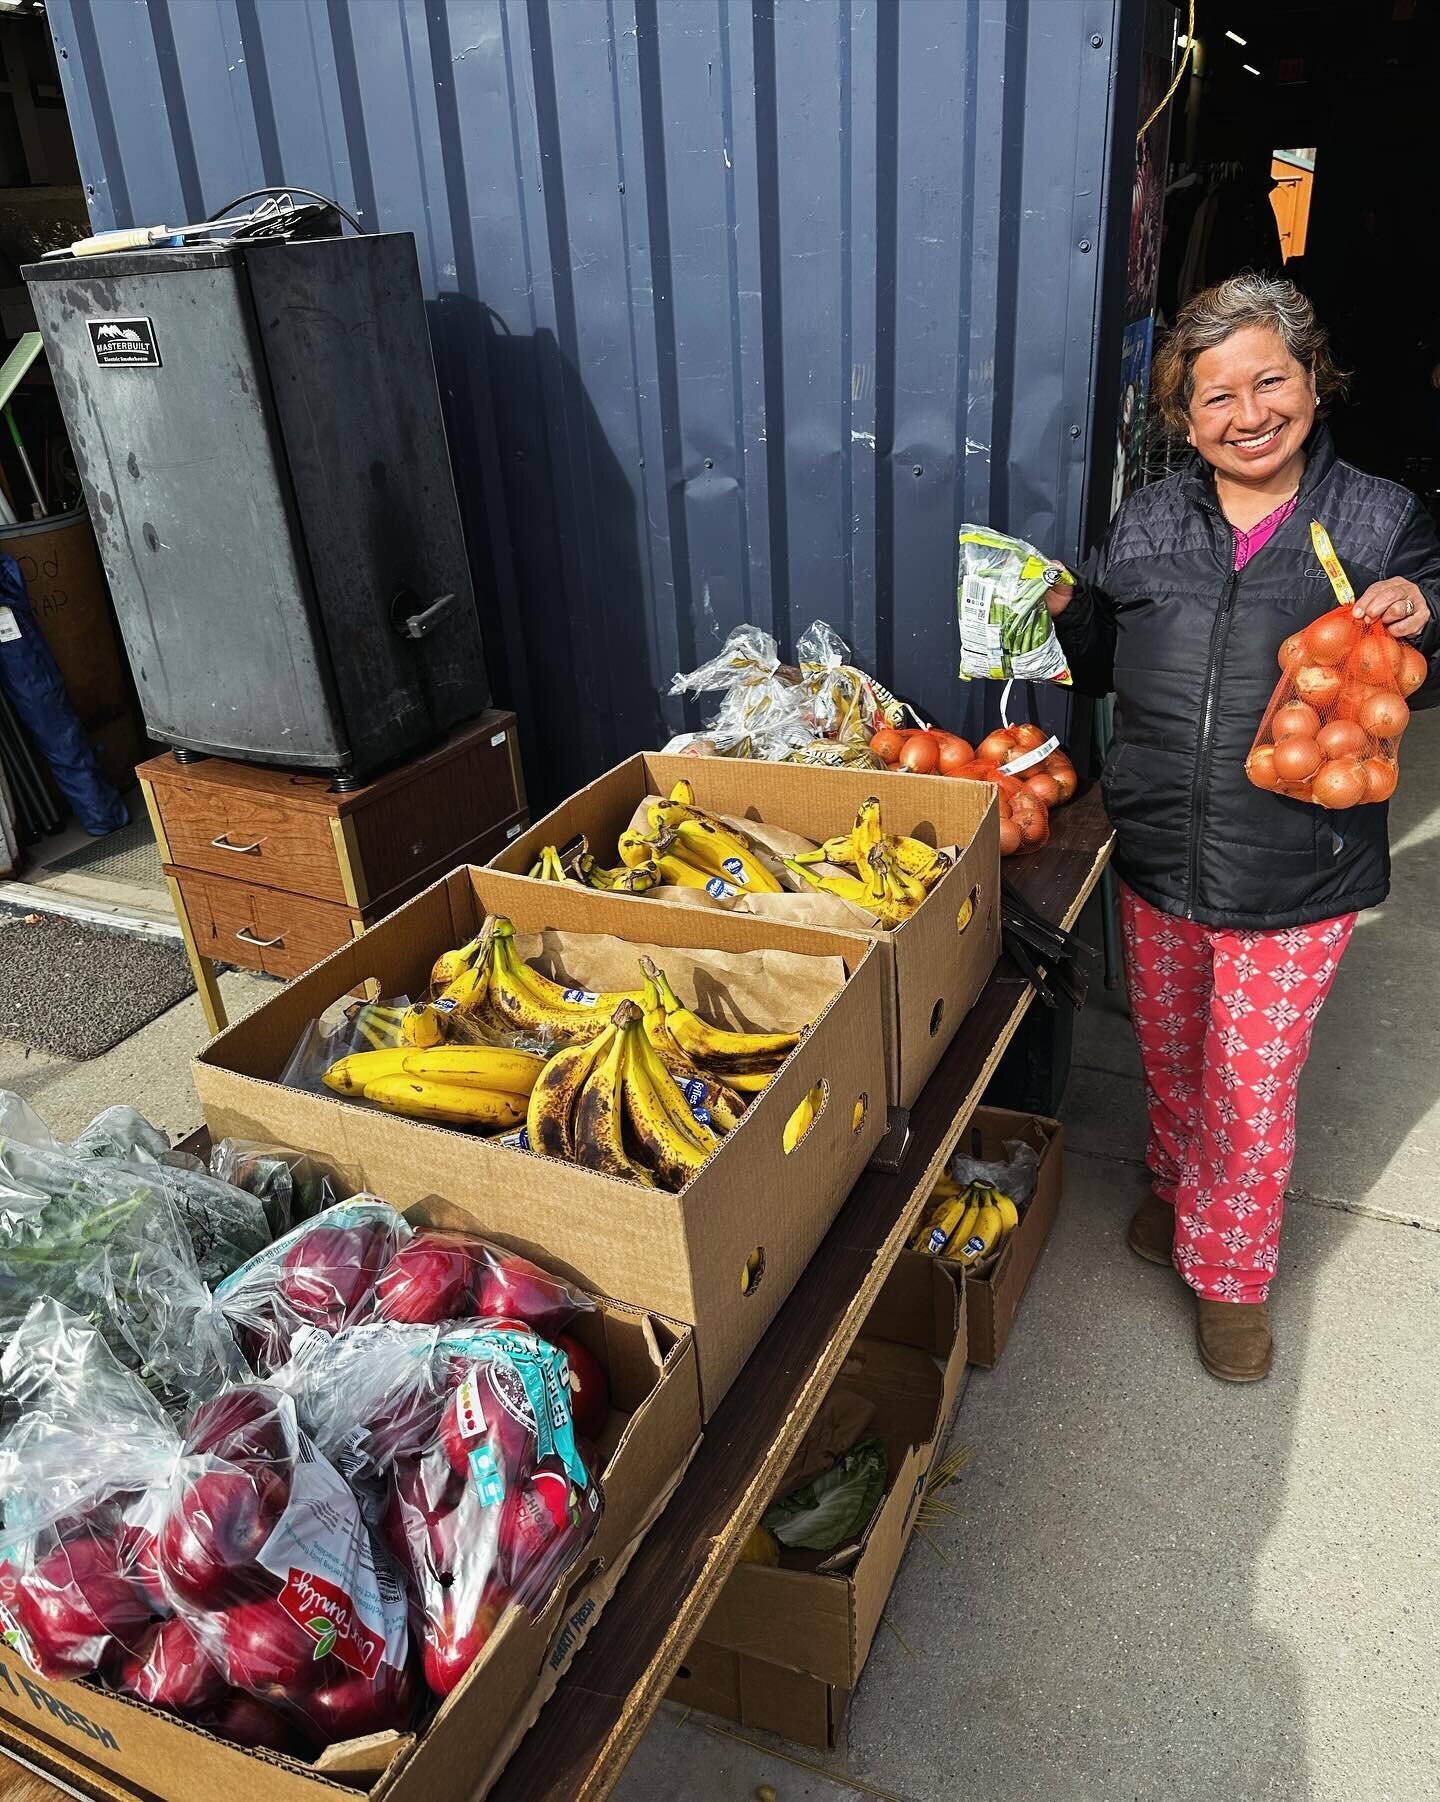 Winter harvests &amp; donations are still firing! Donations got an extra big boost this week with a whopping 872 lbs of produce from @ourfamilyfoods / @hardingsmarket (big thanks to Harding&rsquo;s Three Oaks manager Dennis Romeo in slide 2). We reac